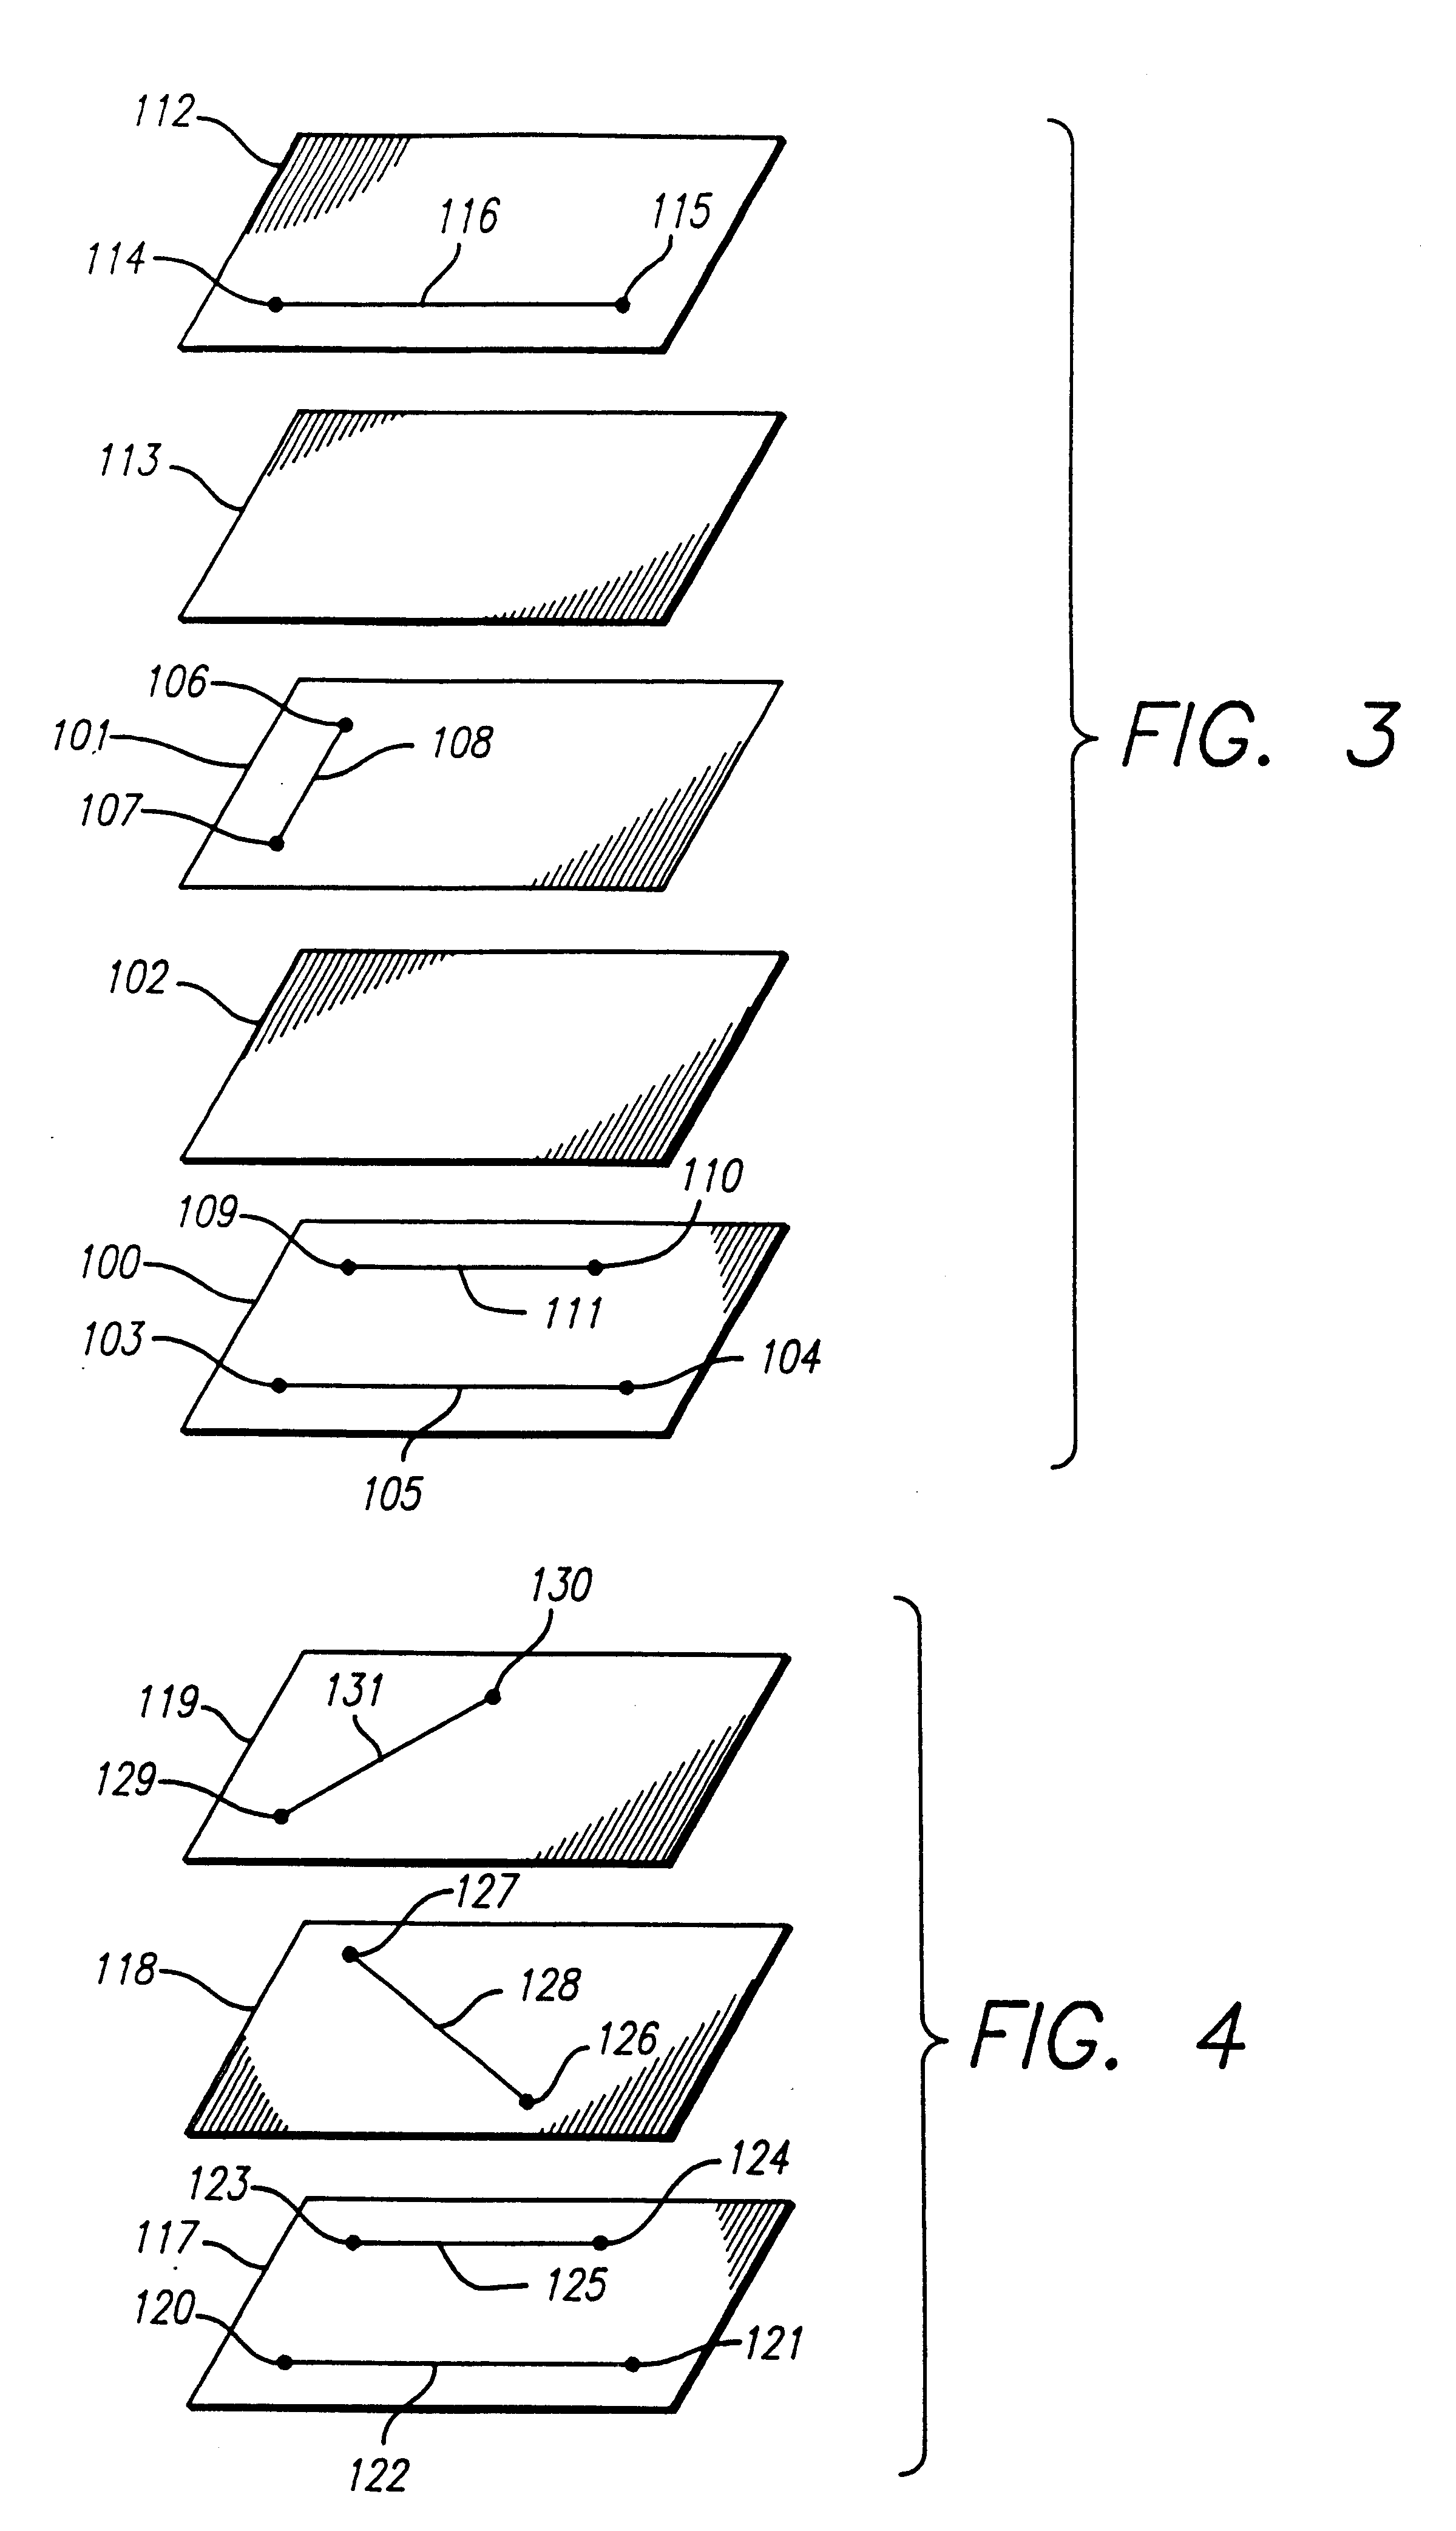 Programmable triangular shaped device having variable gain